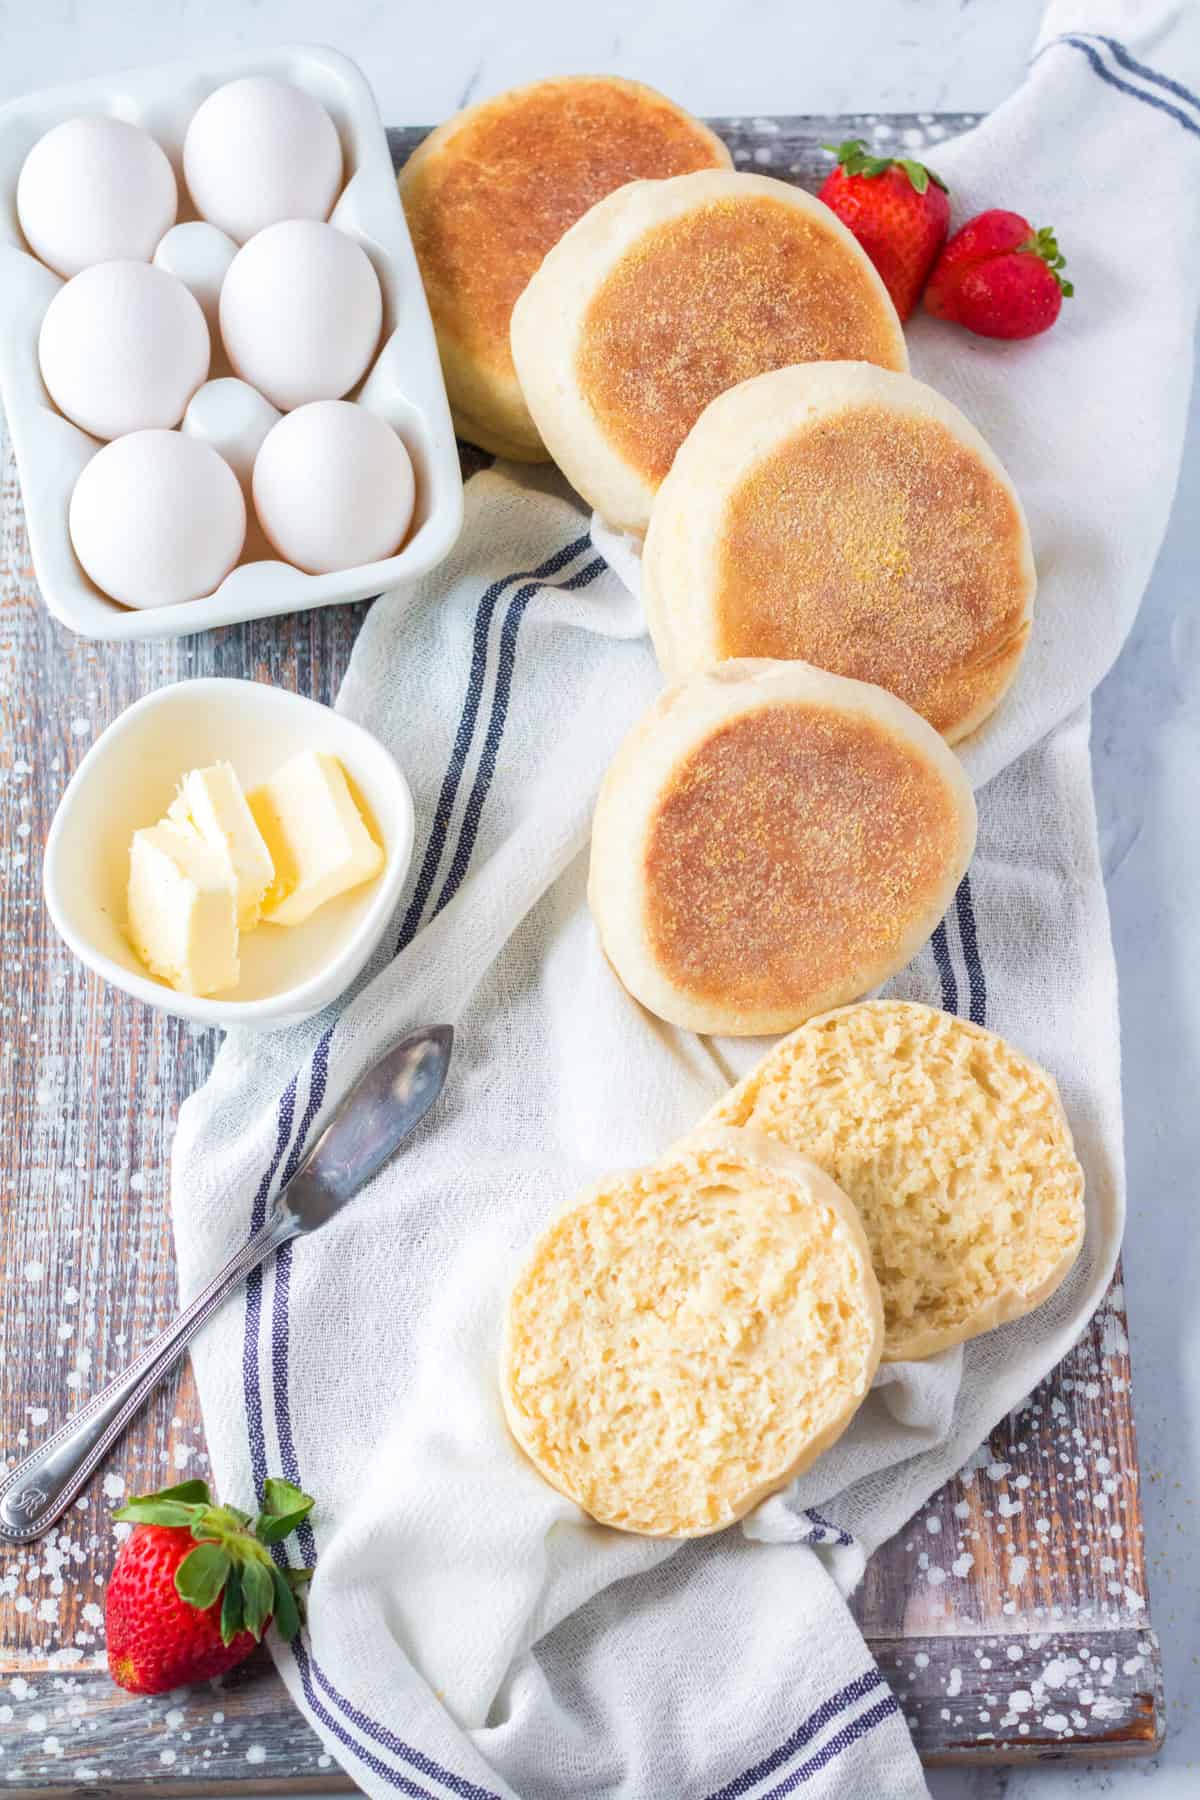 Several english muffins are placed on a countertop next to sliced butter and six eggs.